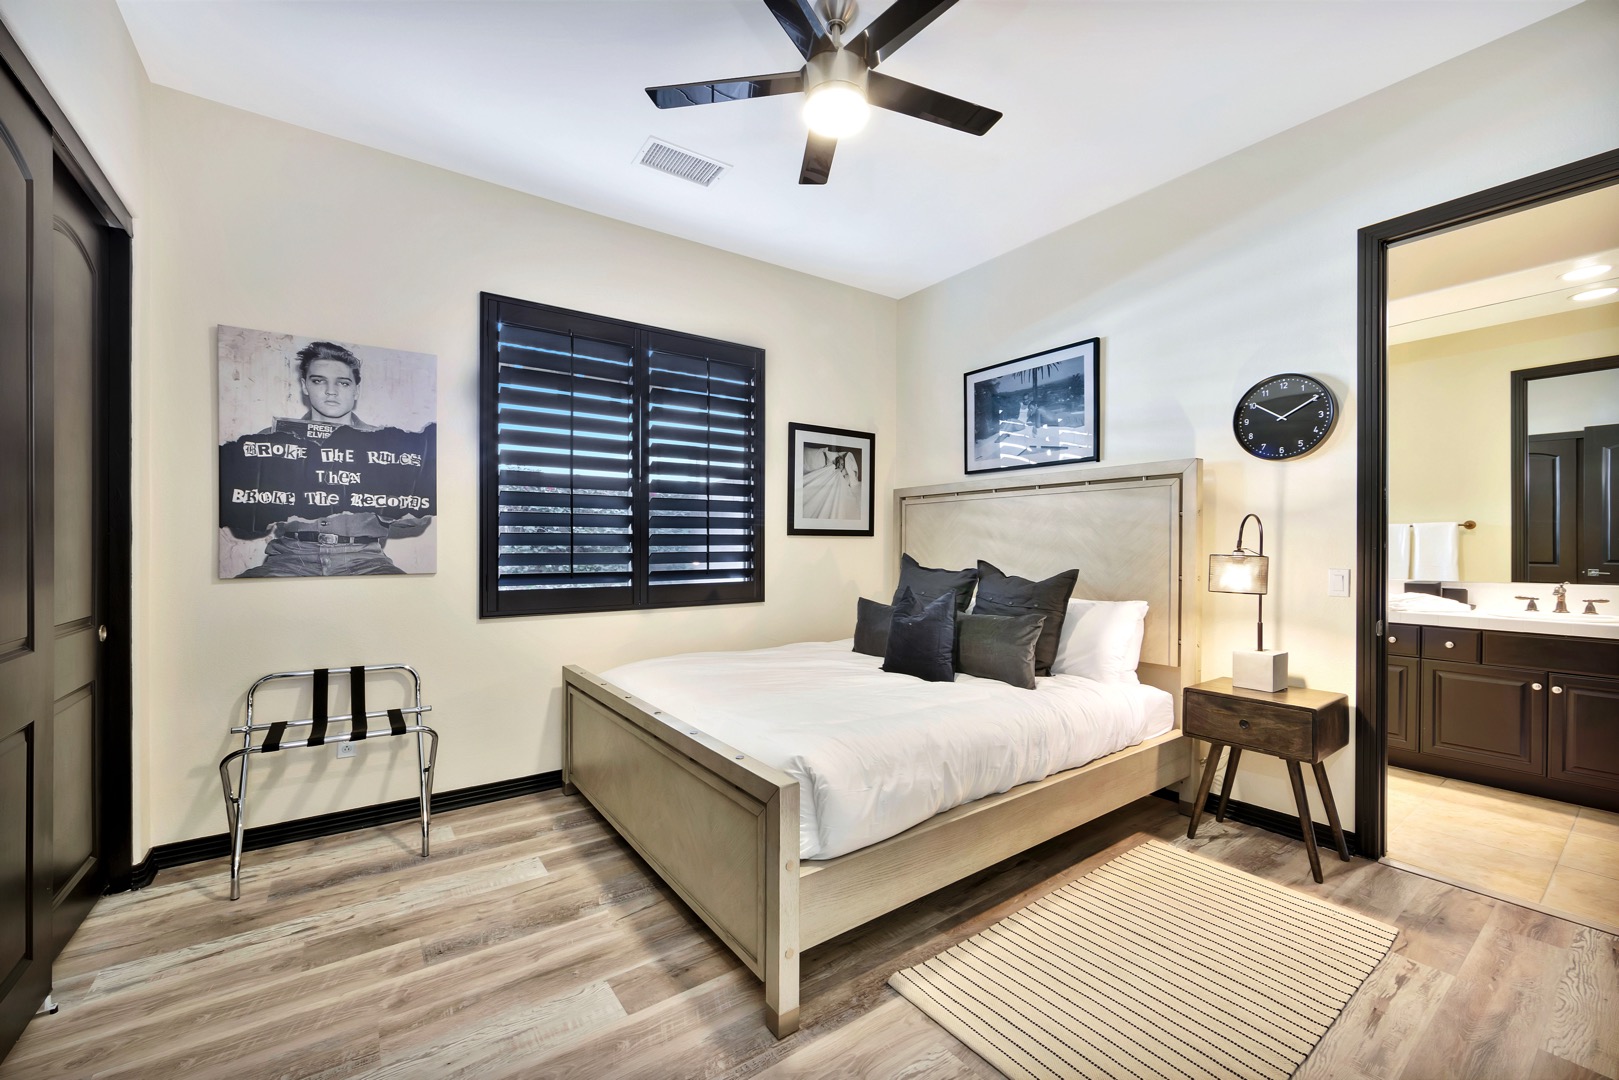 Bedroom 3 has a king size bed, 50-inch TV and shares a Jack & Jill bathroom with bedroom #4